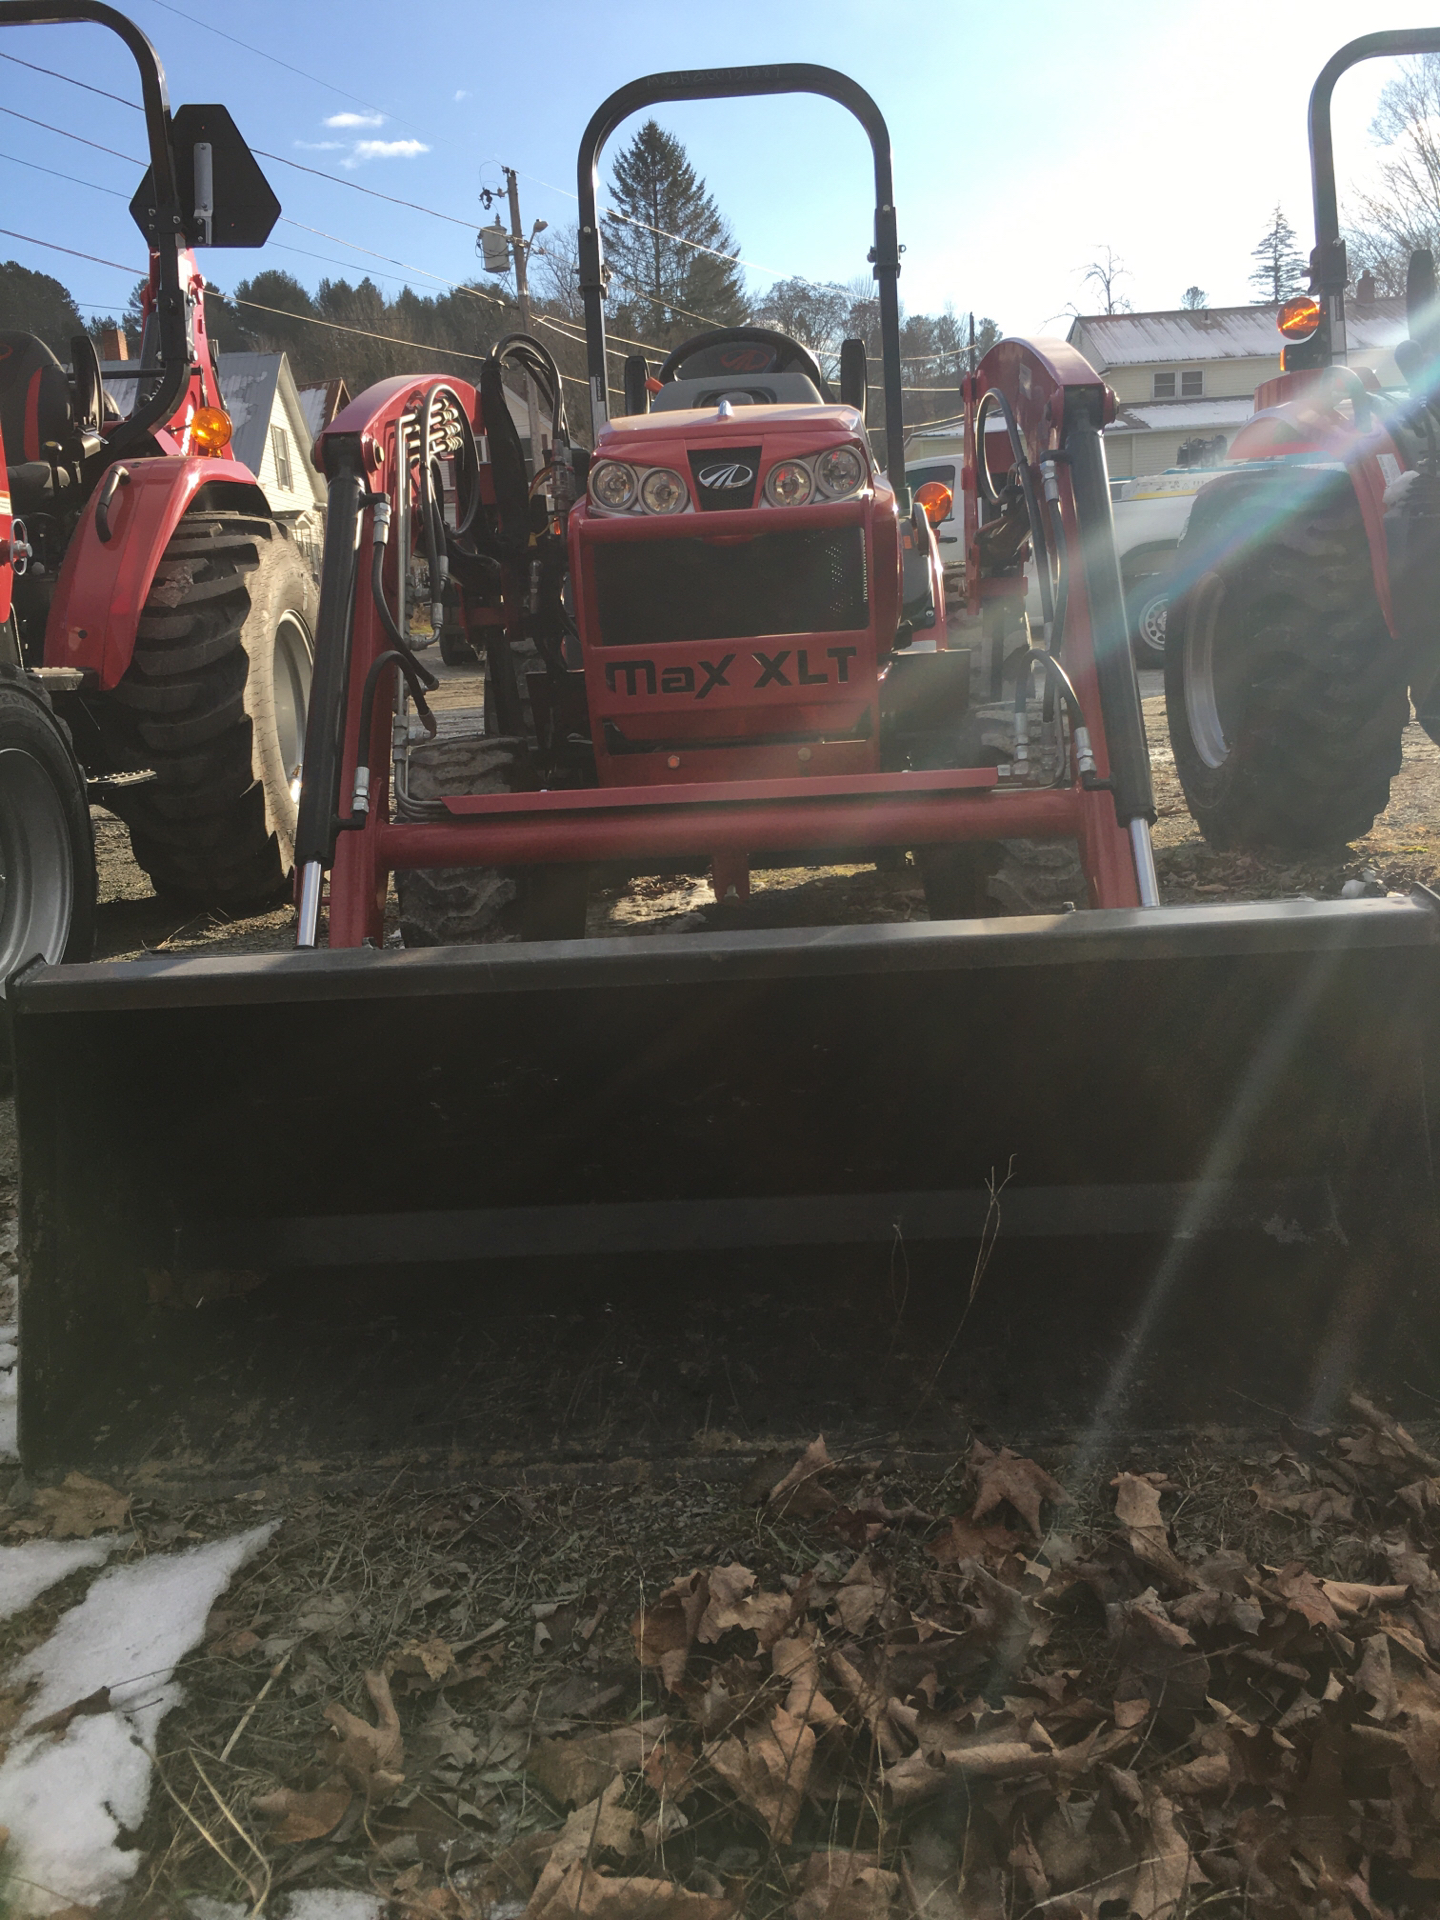 Mahindra TR MAX 26XLT H W/IND Tires and Loader in Saint Johnsbury, Vermont - Photo 1